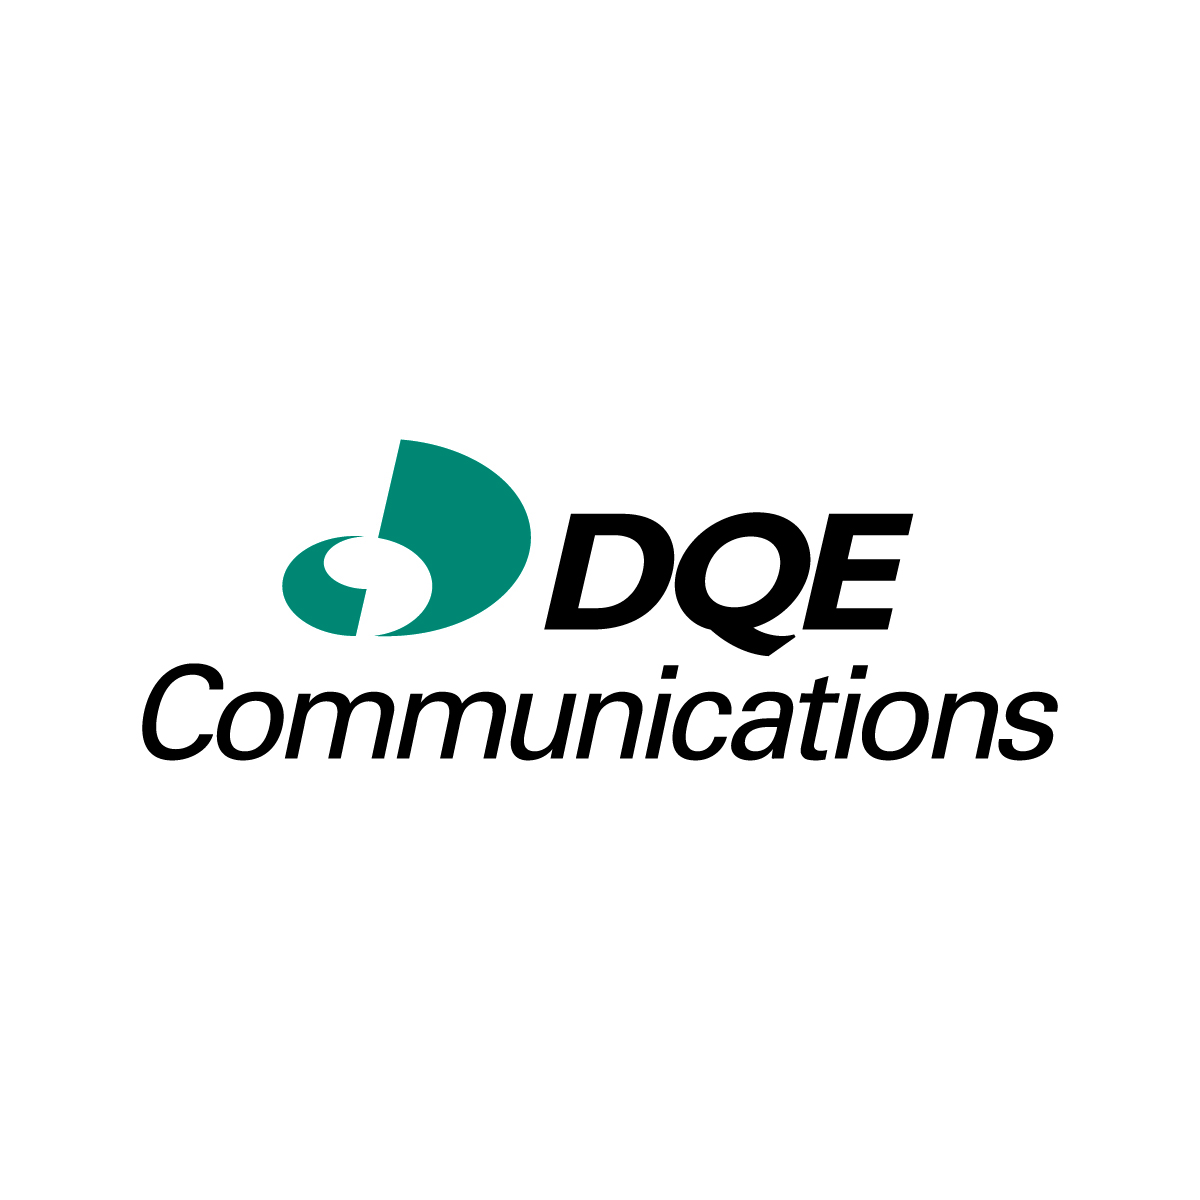 DQE Communications To Be Acquired by GI Partners